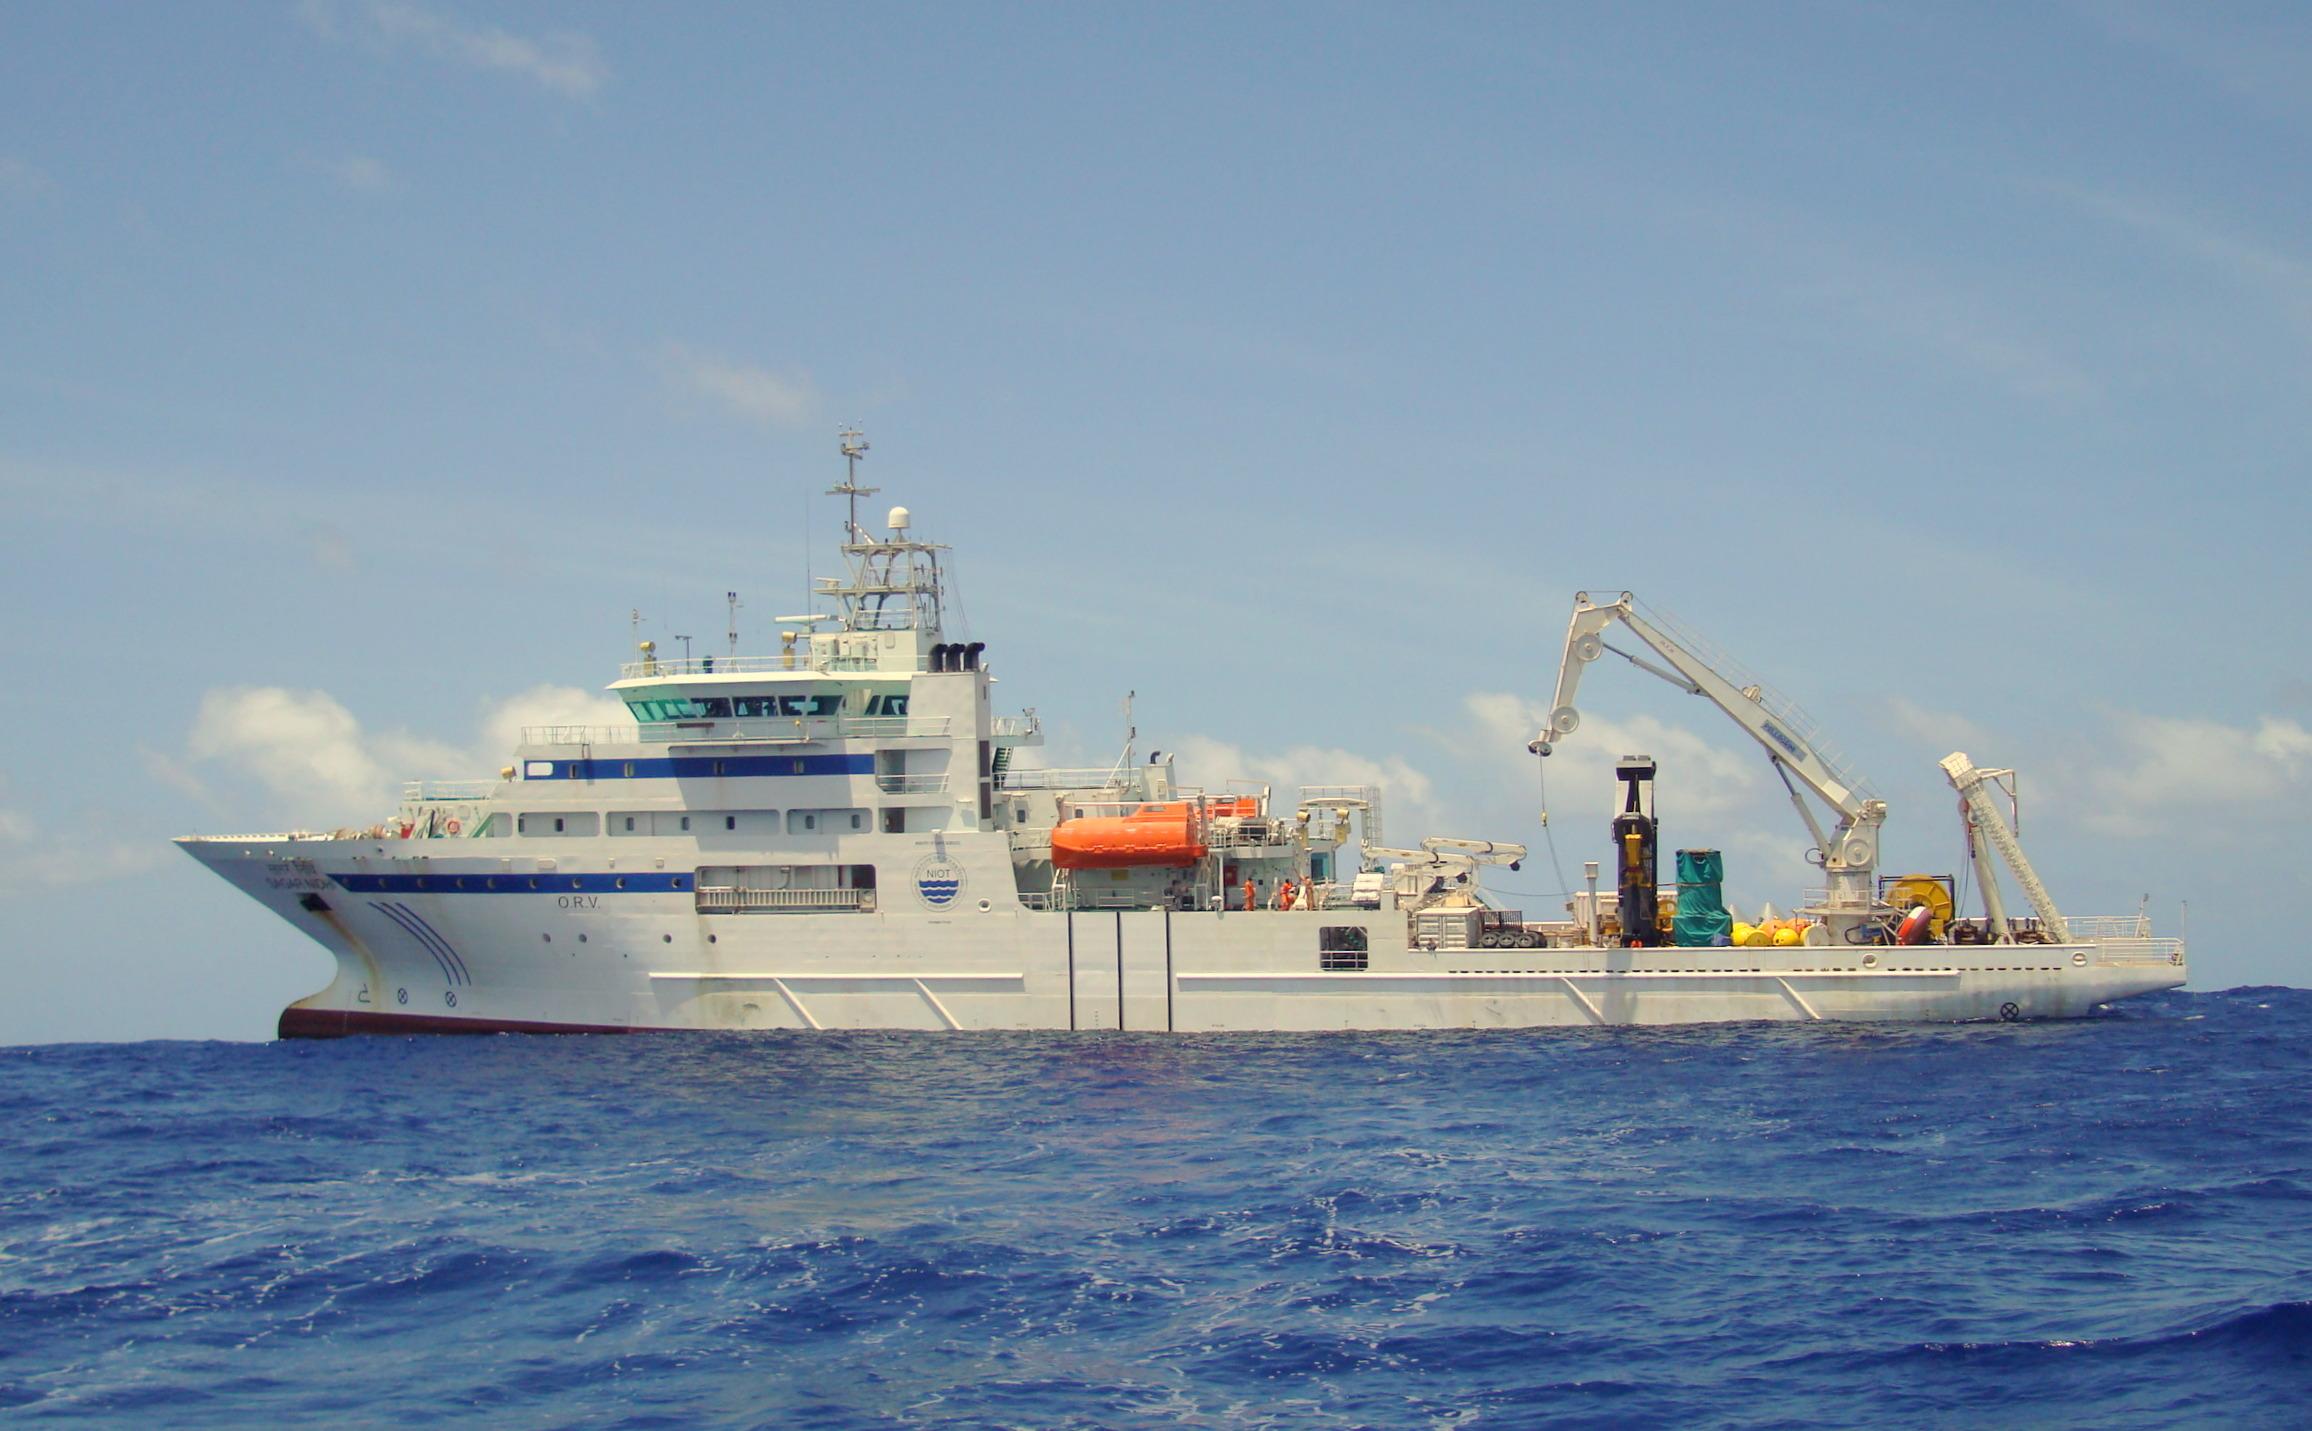 Scientists embark on expedition onboard India's research vessel Sagar Nidhi_50.1